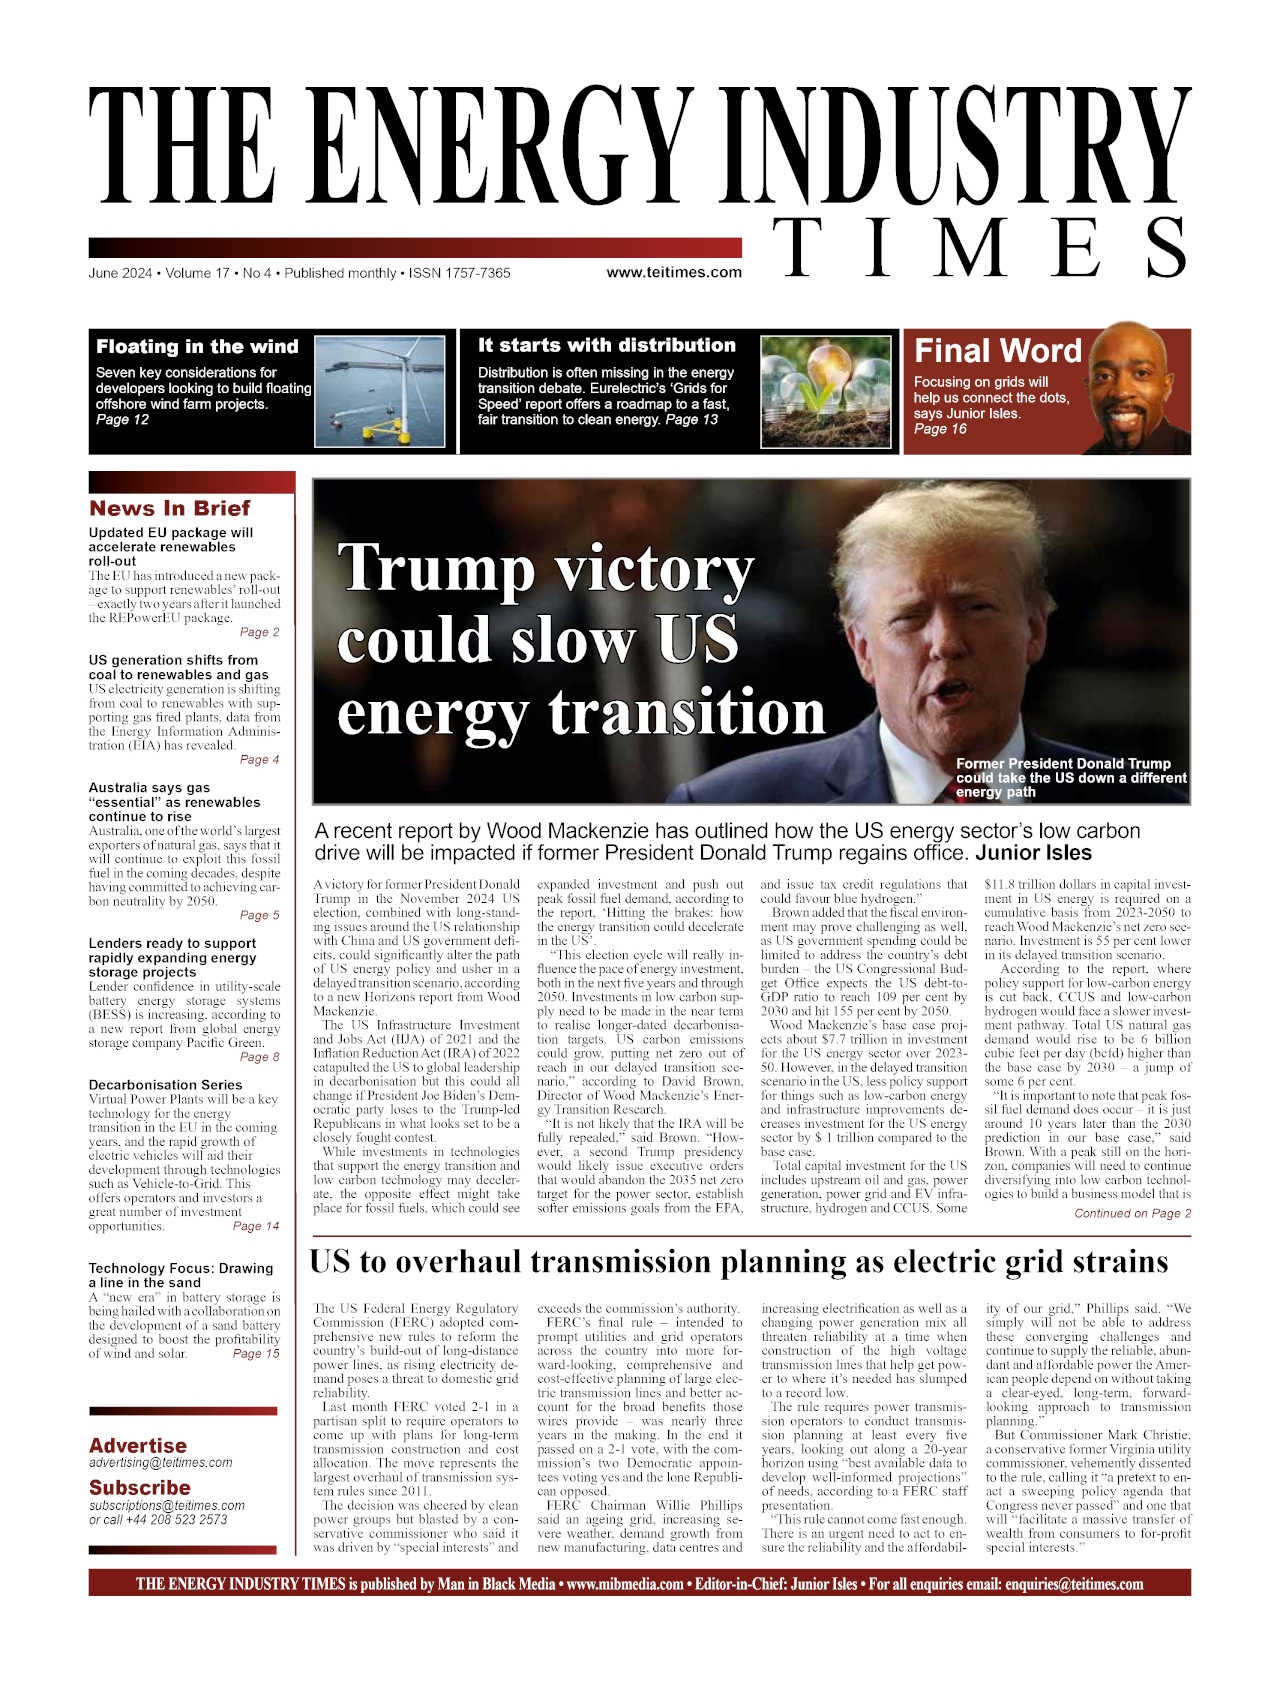 Selected highlights from the June 2024 edition of The Energy Industry Times